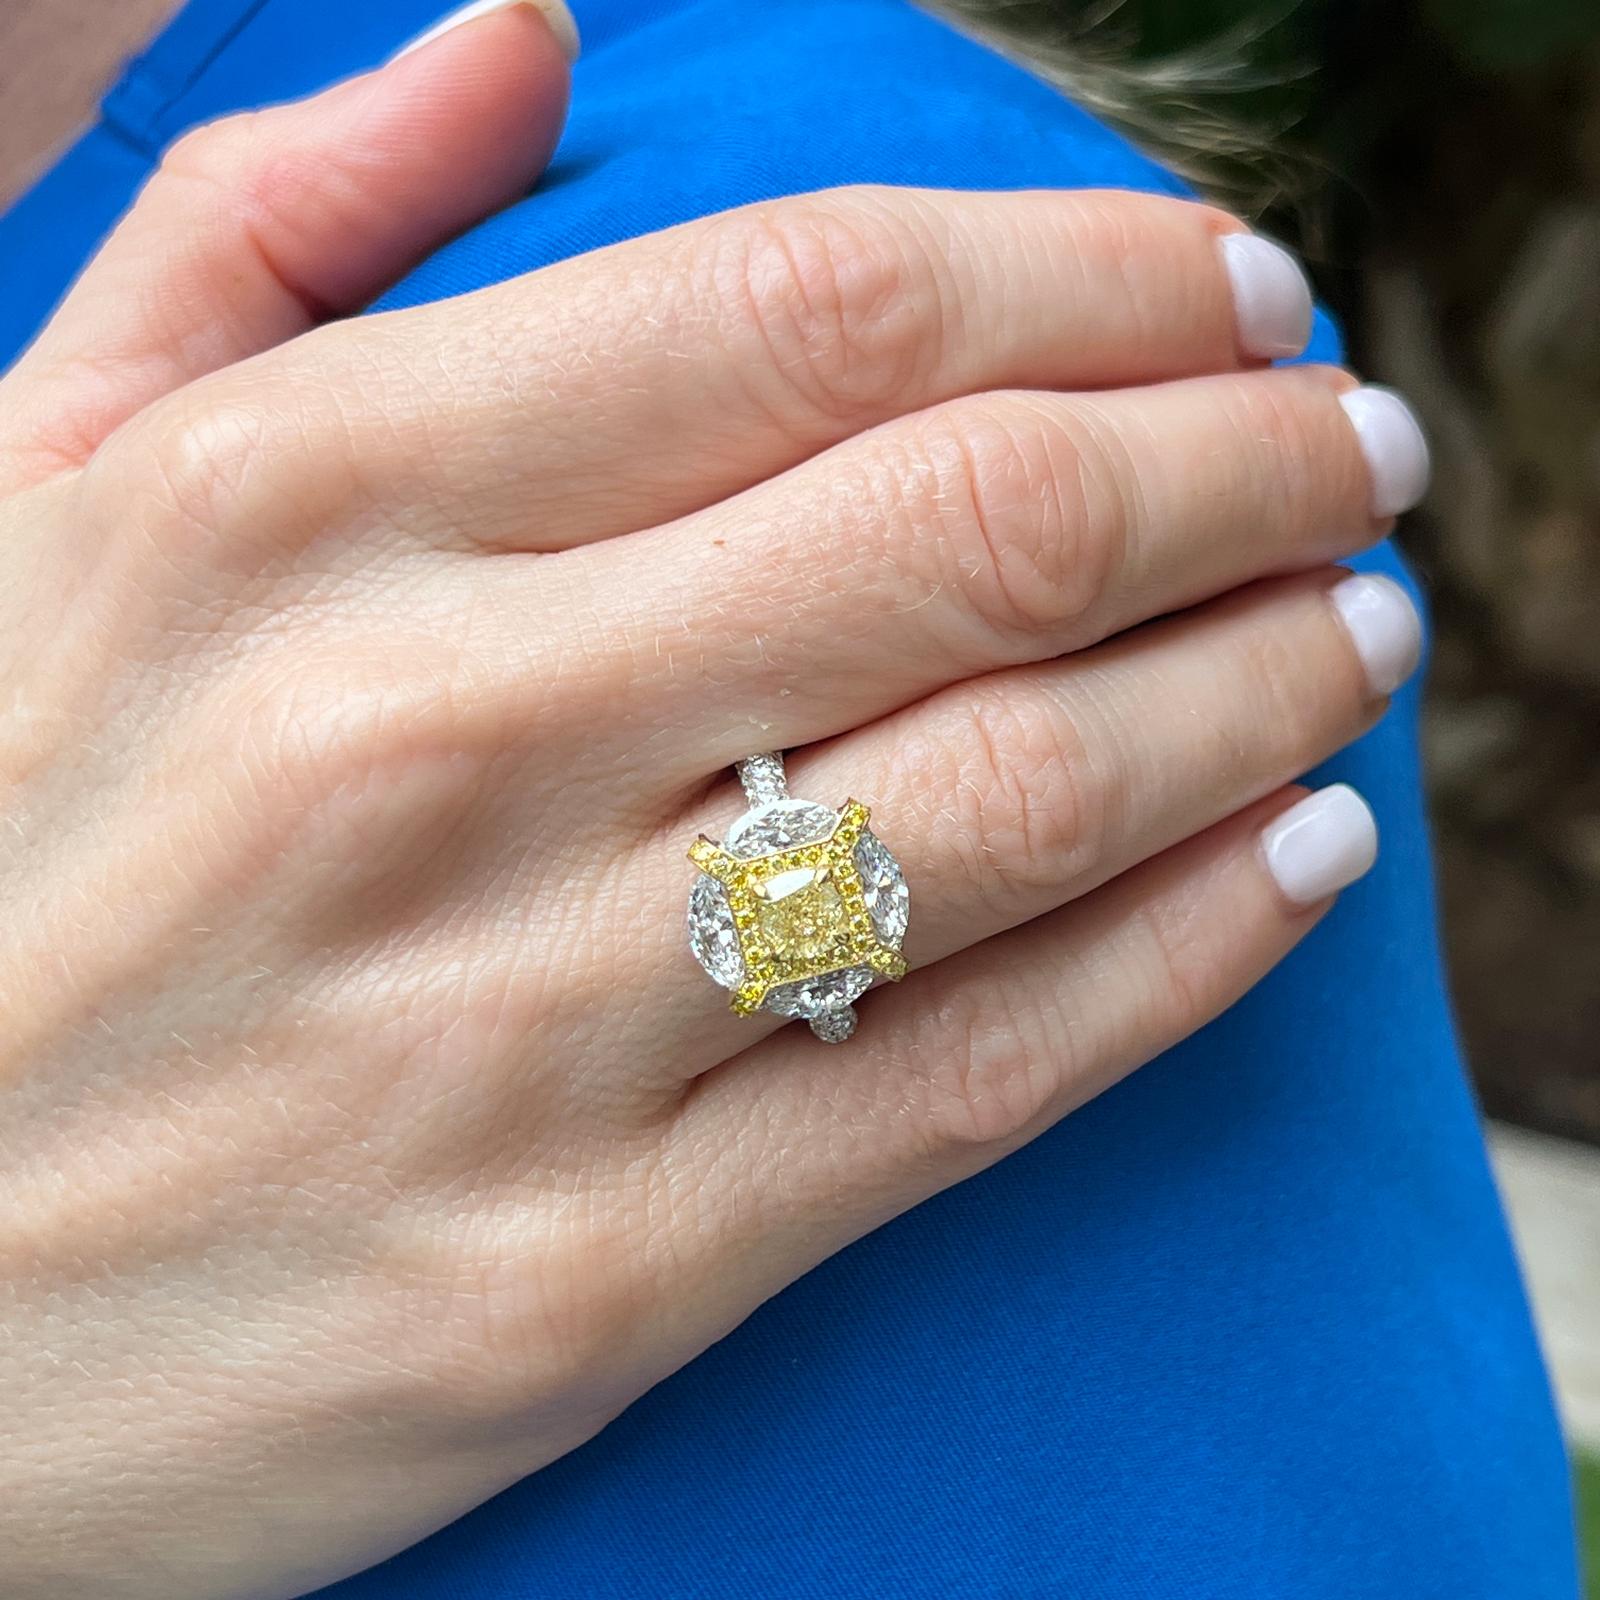 Stunning fancy yellow diamond and white diamond engagement ring crafted in 18 karat yellow and white gold. The ring features an 1.01 cushion cut fancy yellow diamond graded by the GIA NFY/SI2. The 4 white marquise diamonds weigh 1.28 CTW, and the